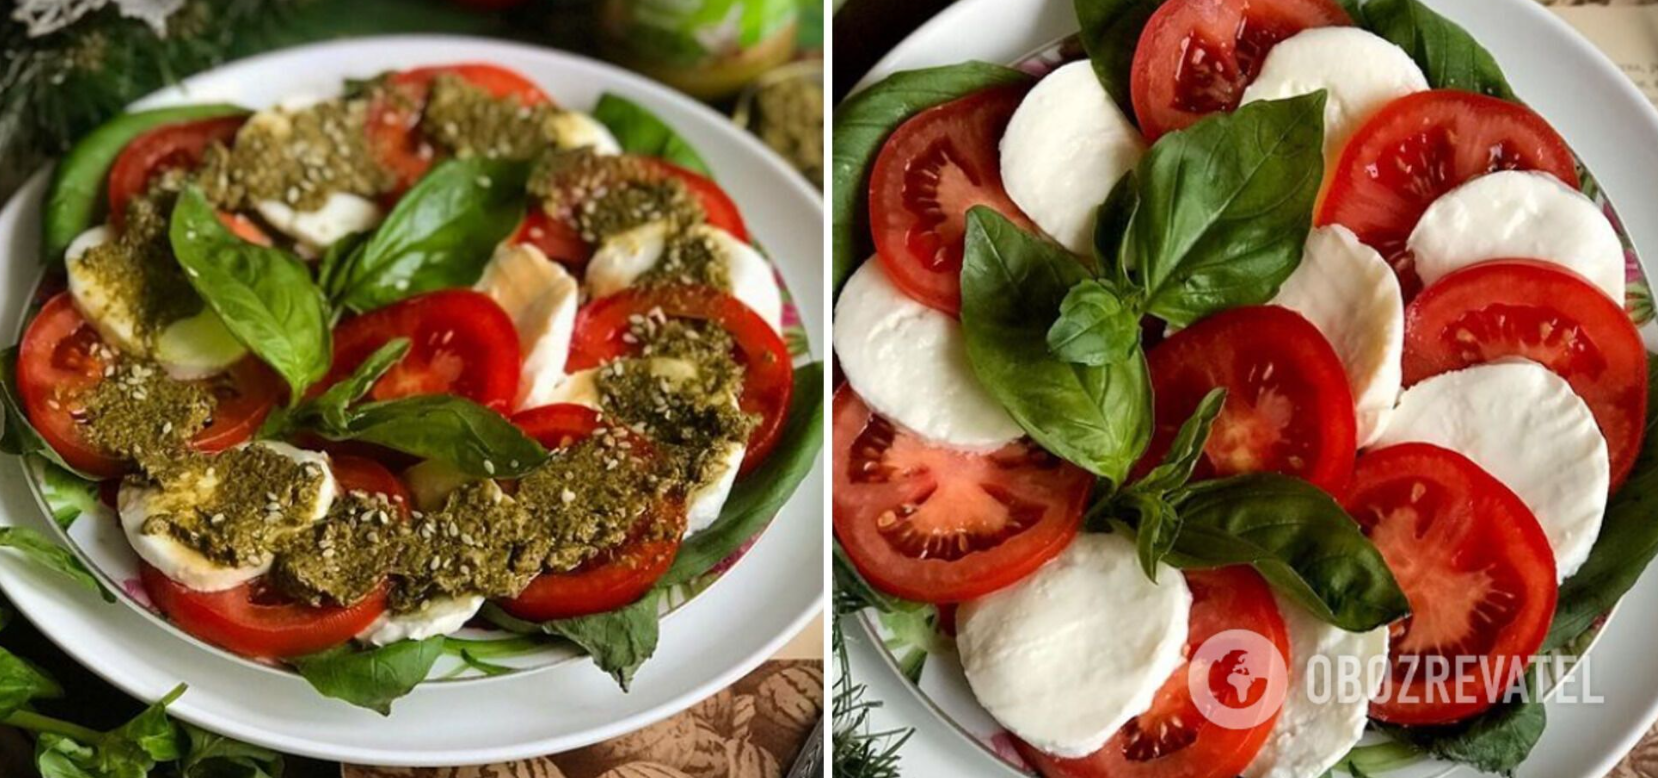 Caprese salad with pesto and olive oil